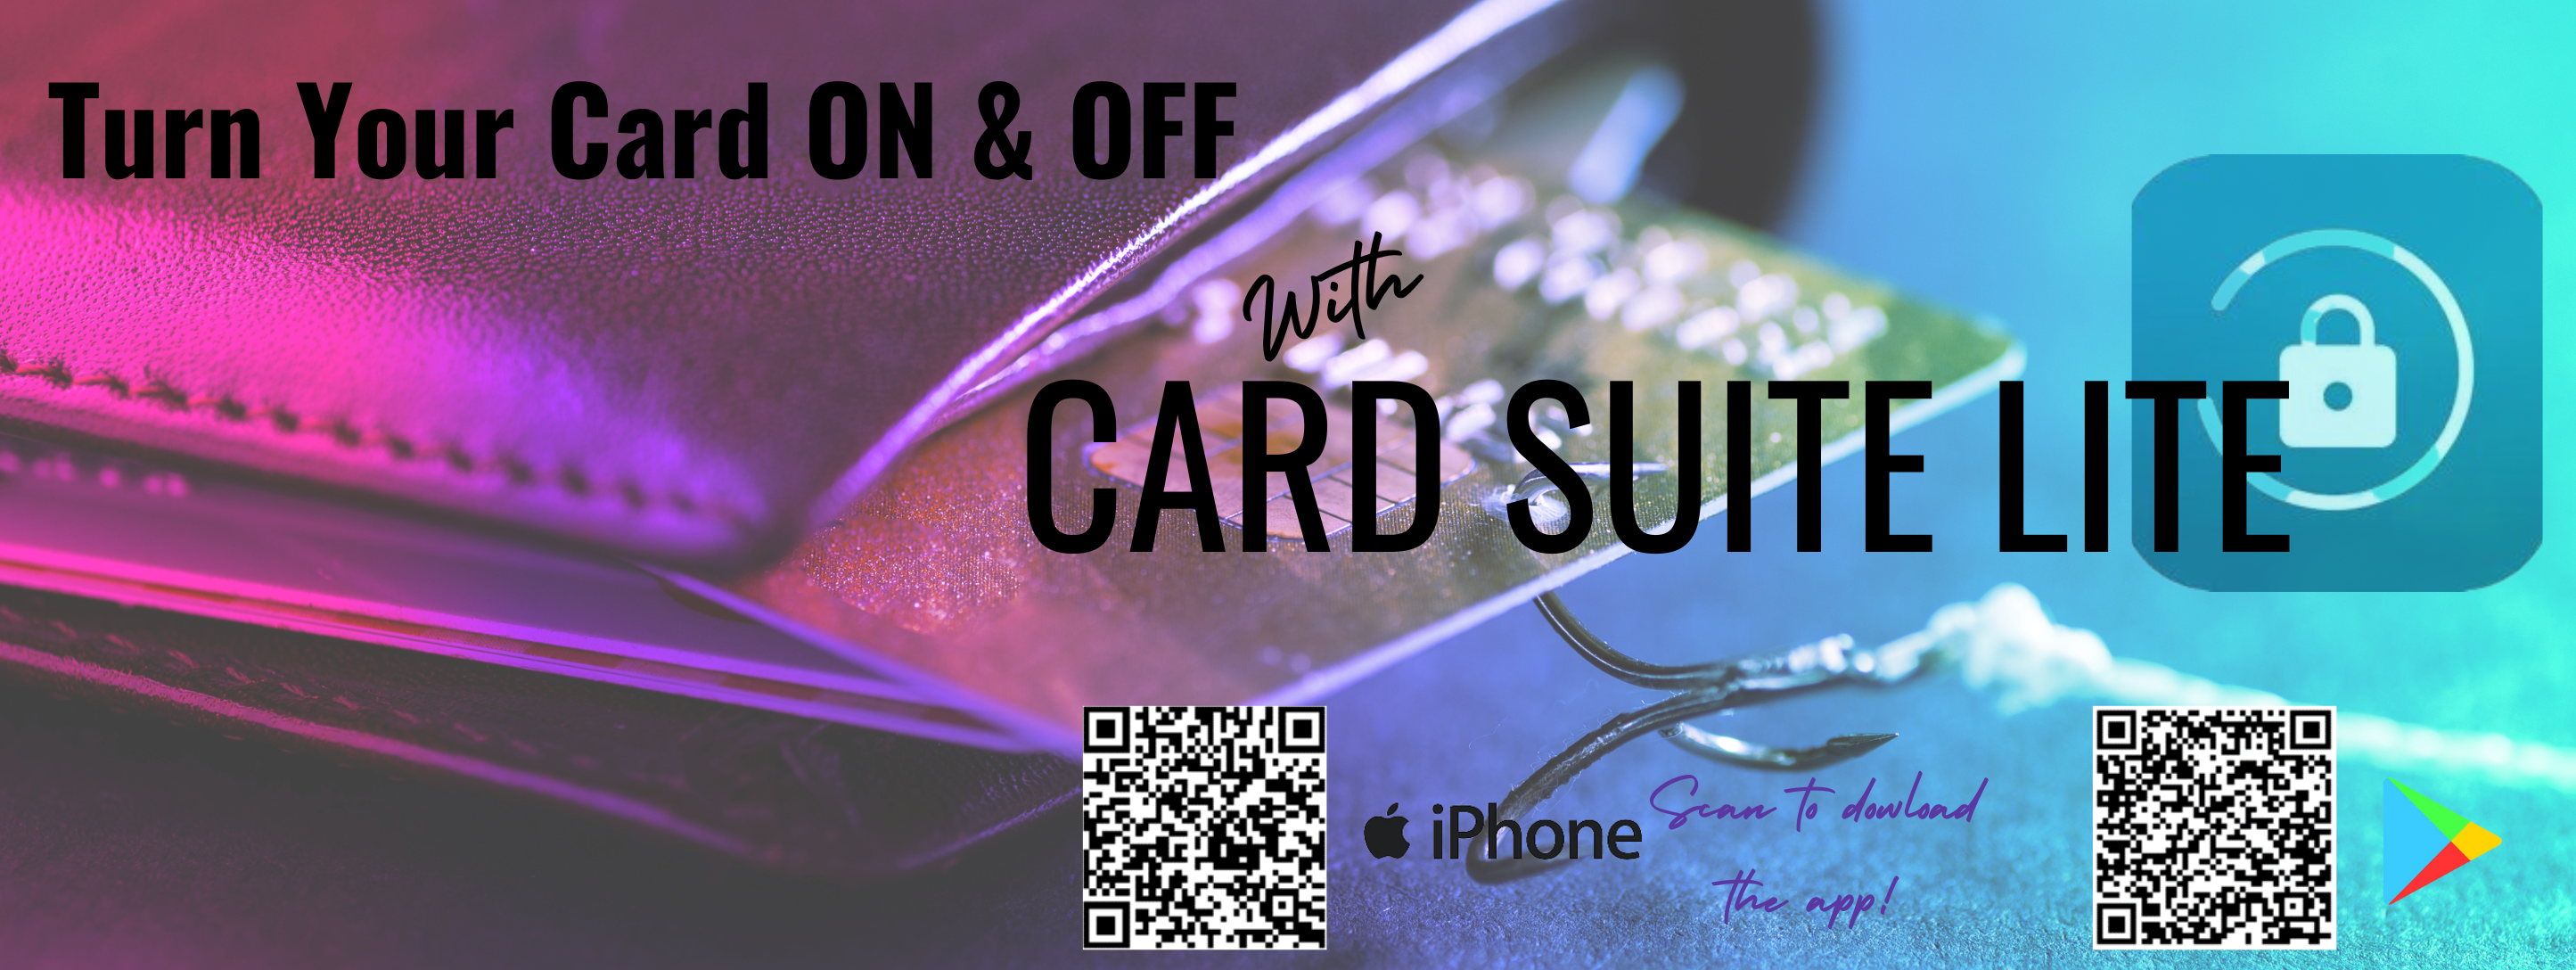 Turn your card on & off with card suite lite. Scan to download the app from the Apple App Store or Google Play.